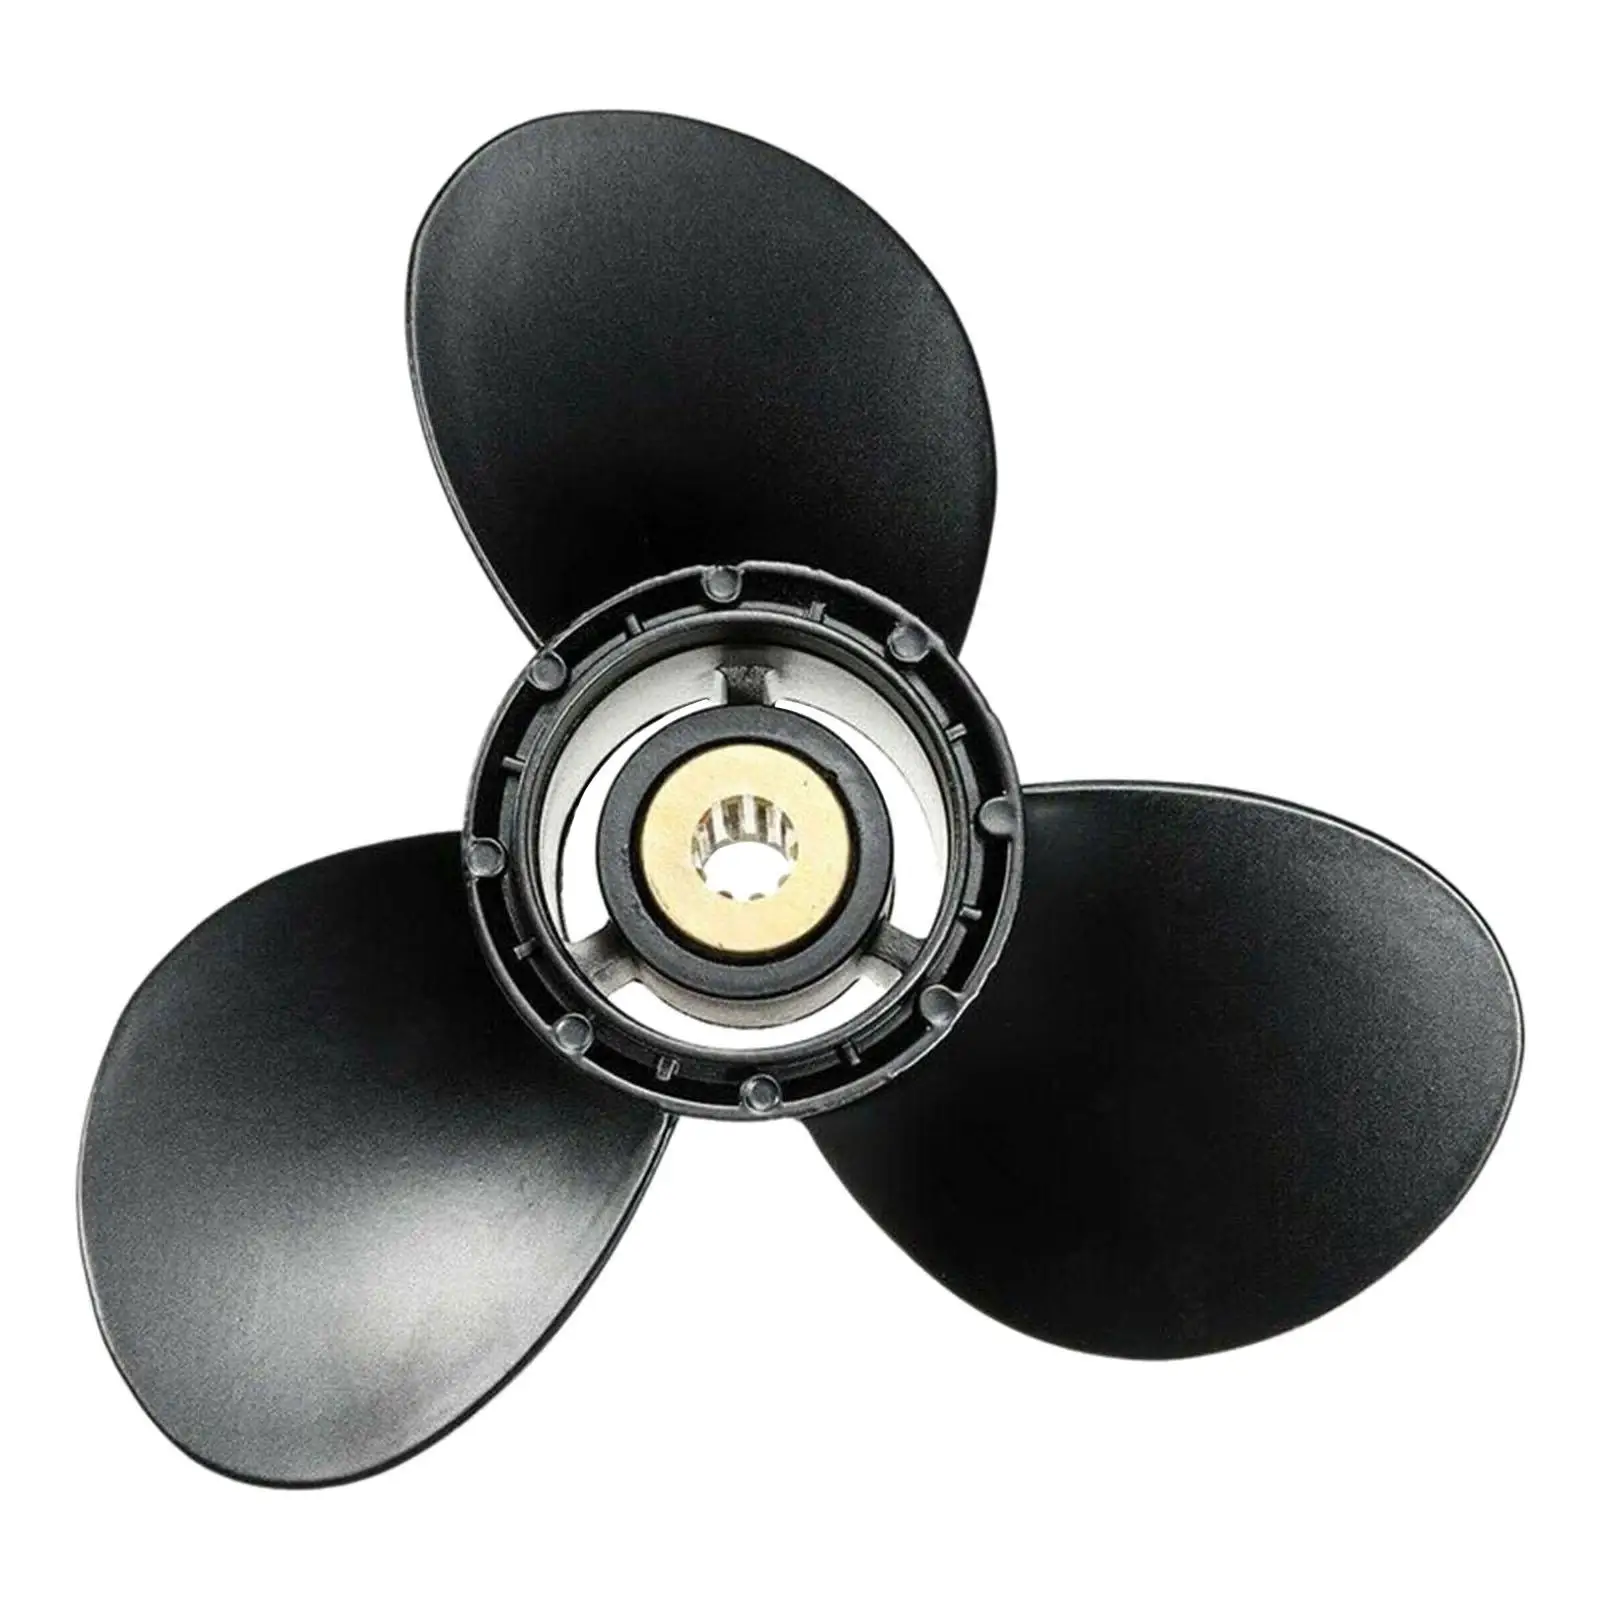 Outboard Propeller Assembly 58100-93723-019 3 Blade Prop for Suzuki Outboard DF8A DT9.9